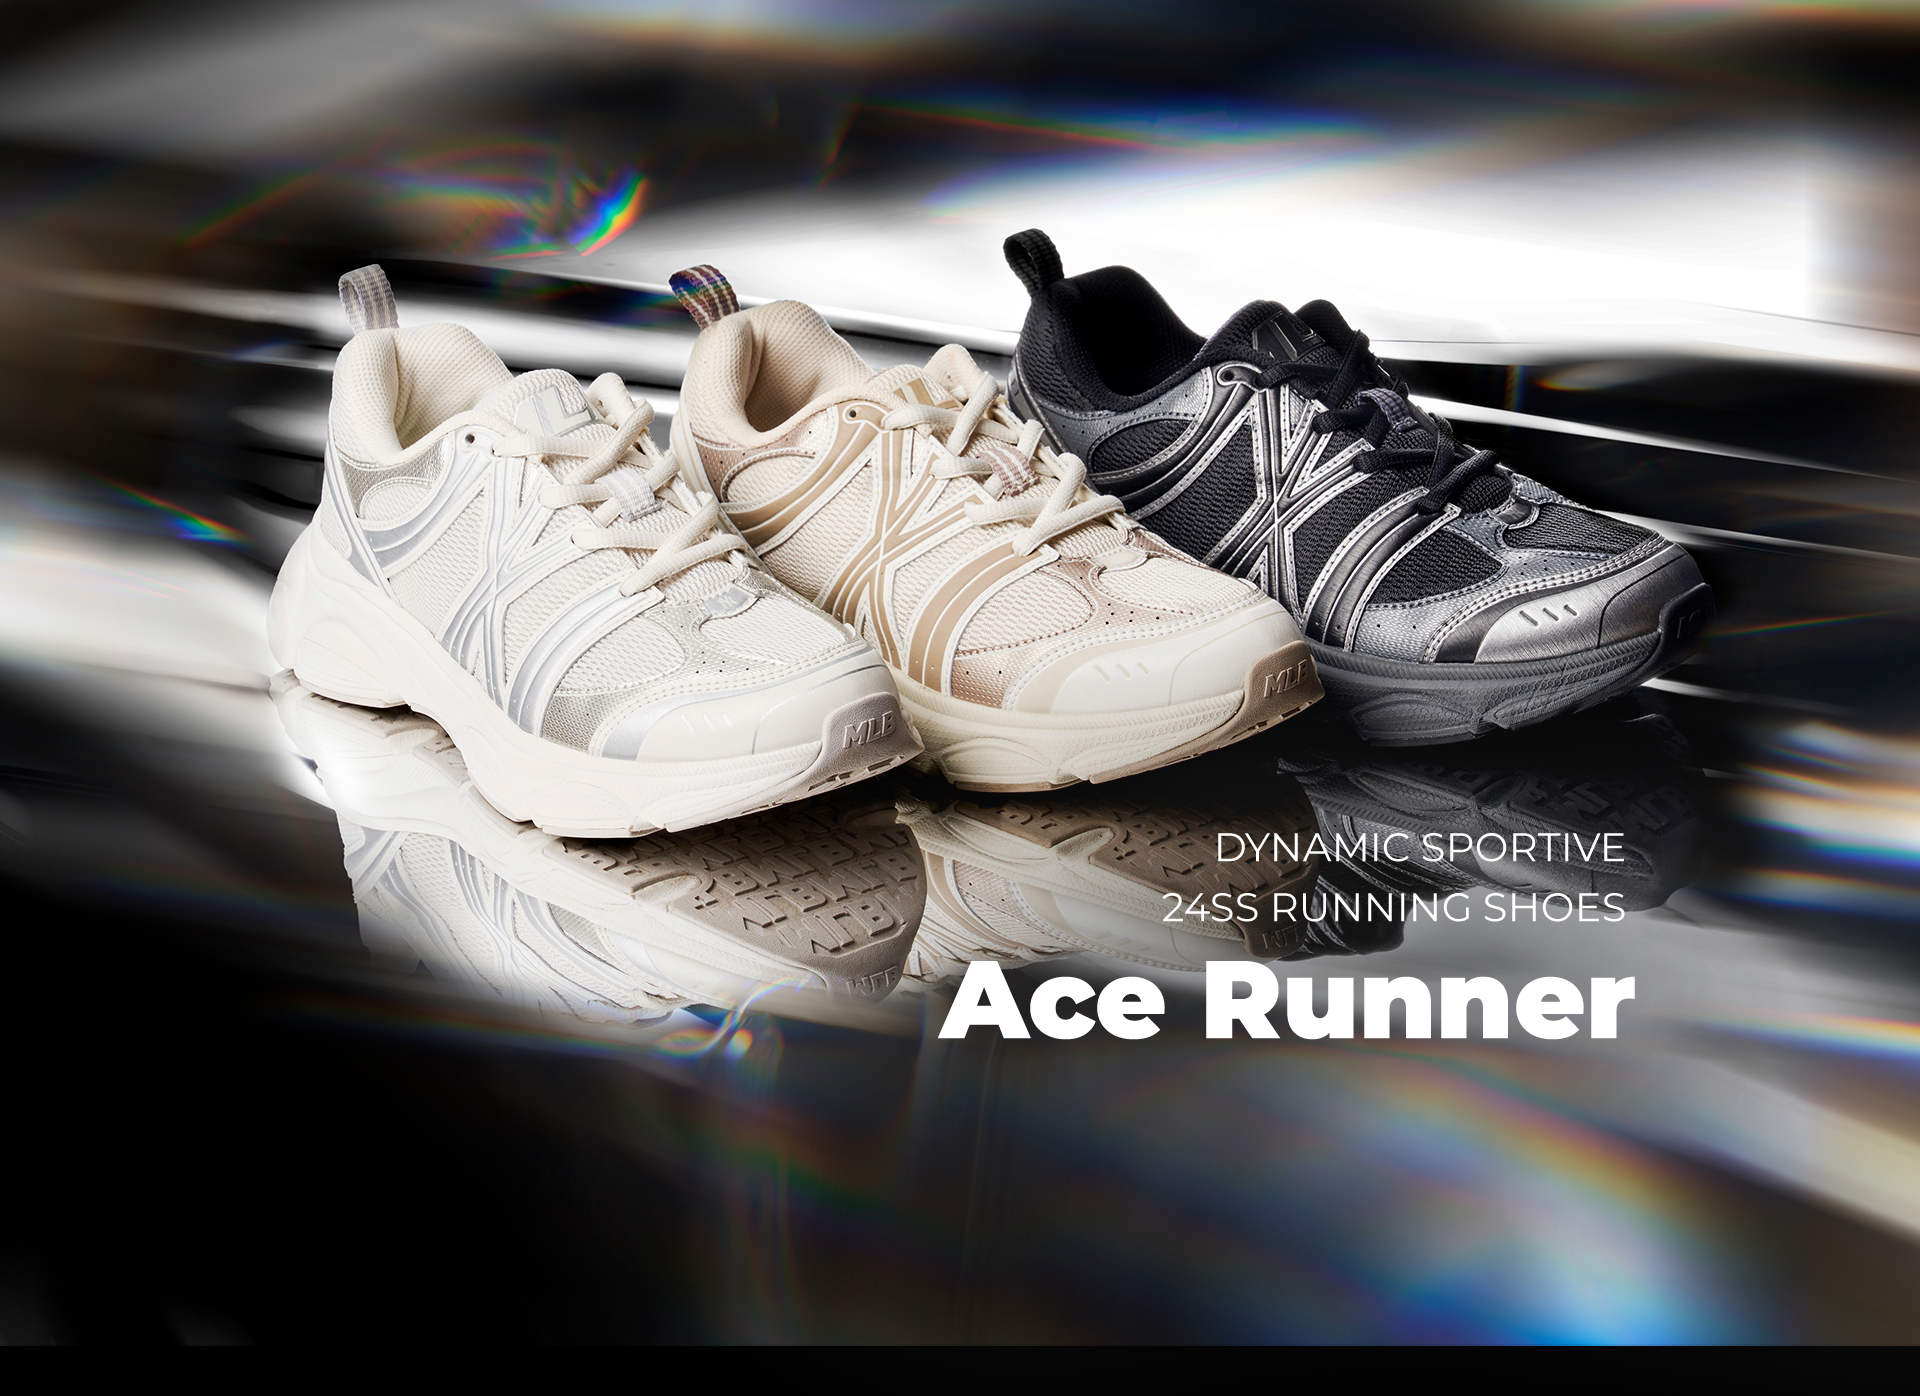 DYNAMIC SPORTIVE 24SS RUNNING SHOES Ace Runner